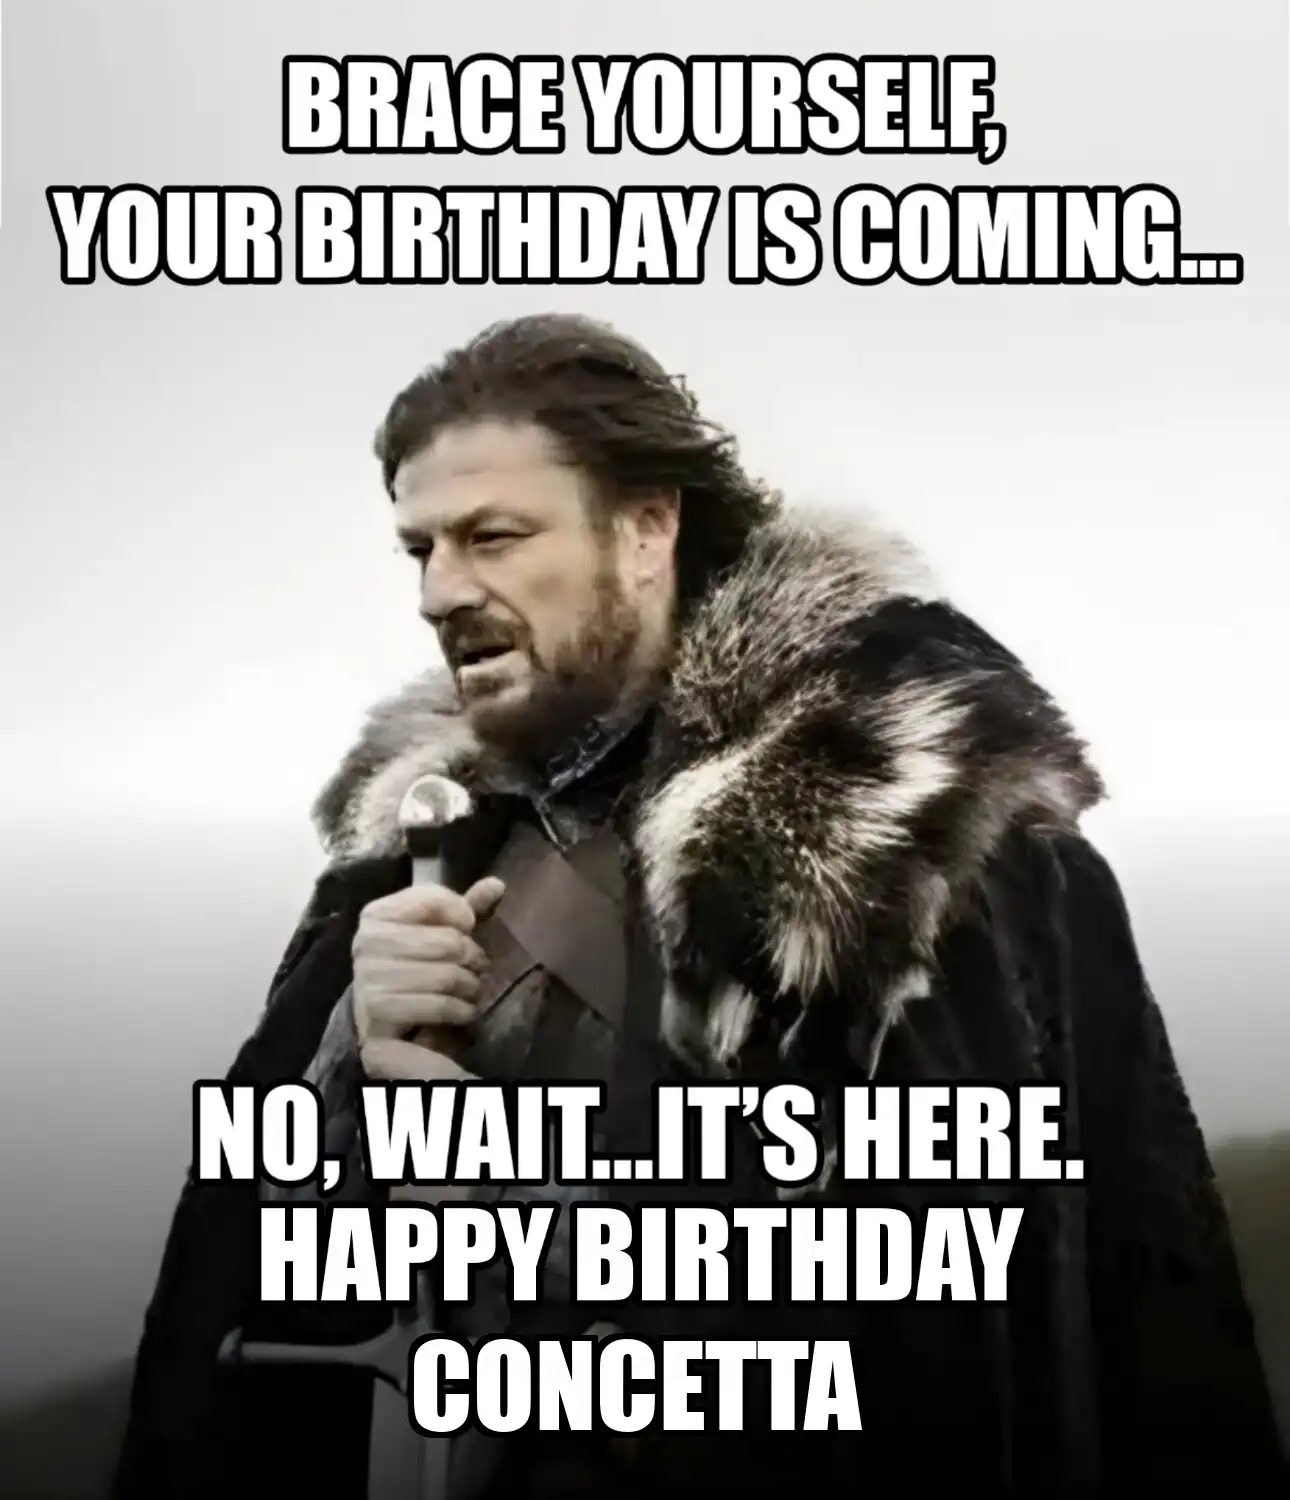 Happy Birthday Concetta Brace Yourself Your Birthday Is Coming Meme